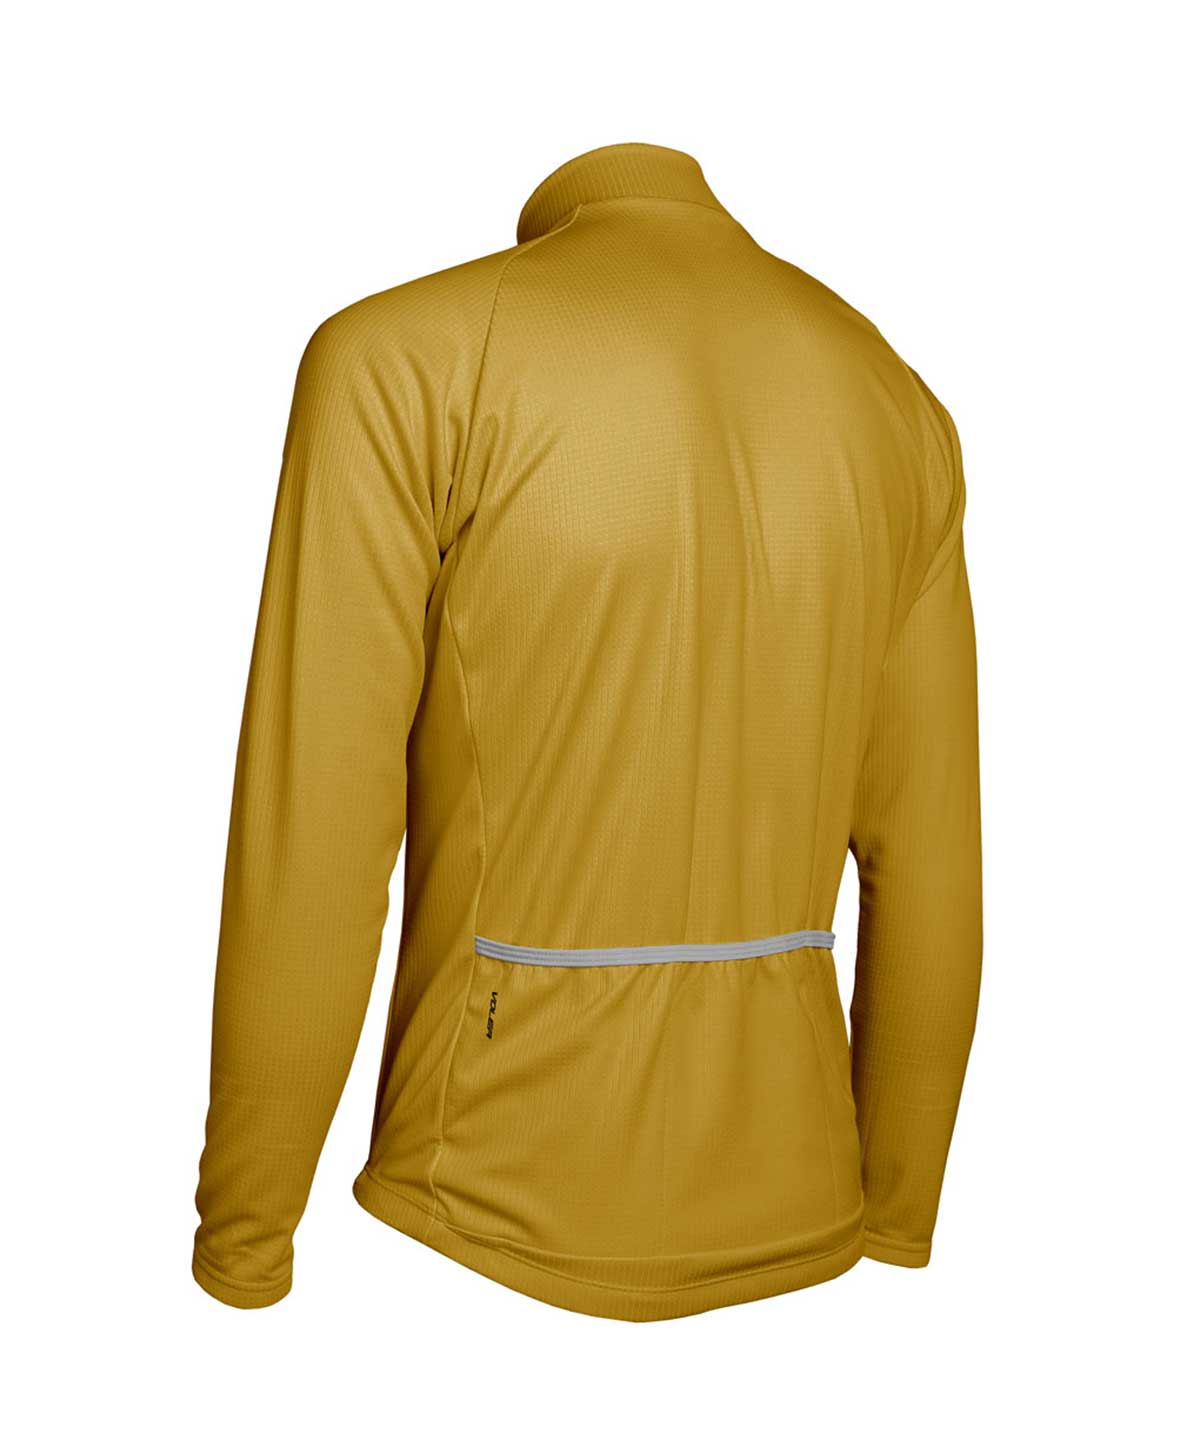 M. PELOTON THERMAL JERSEY - SOLID